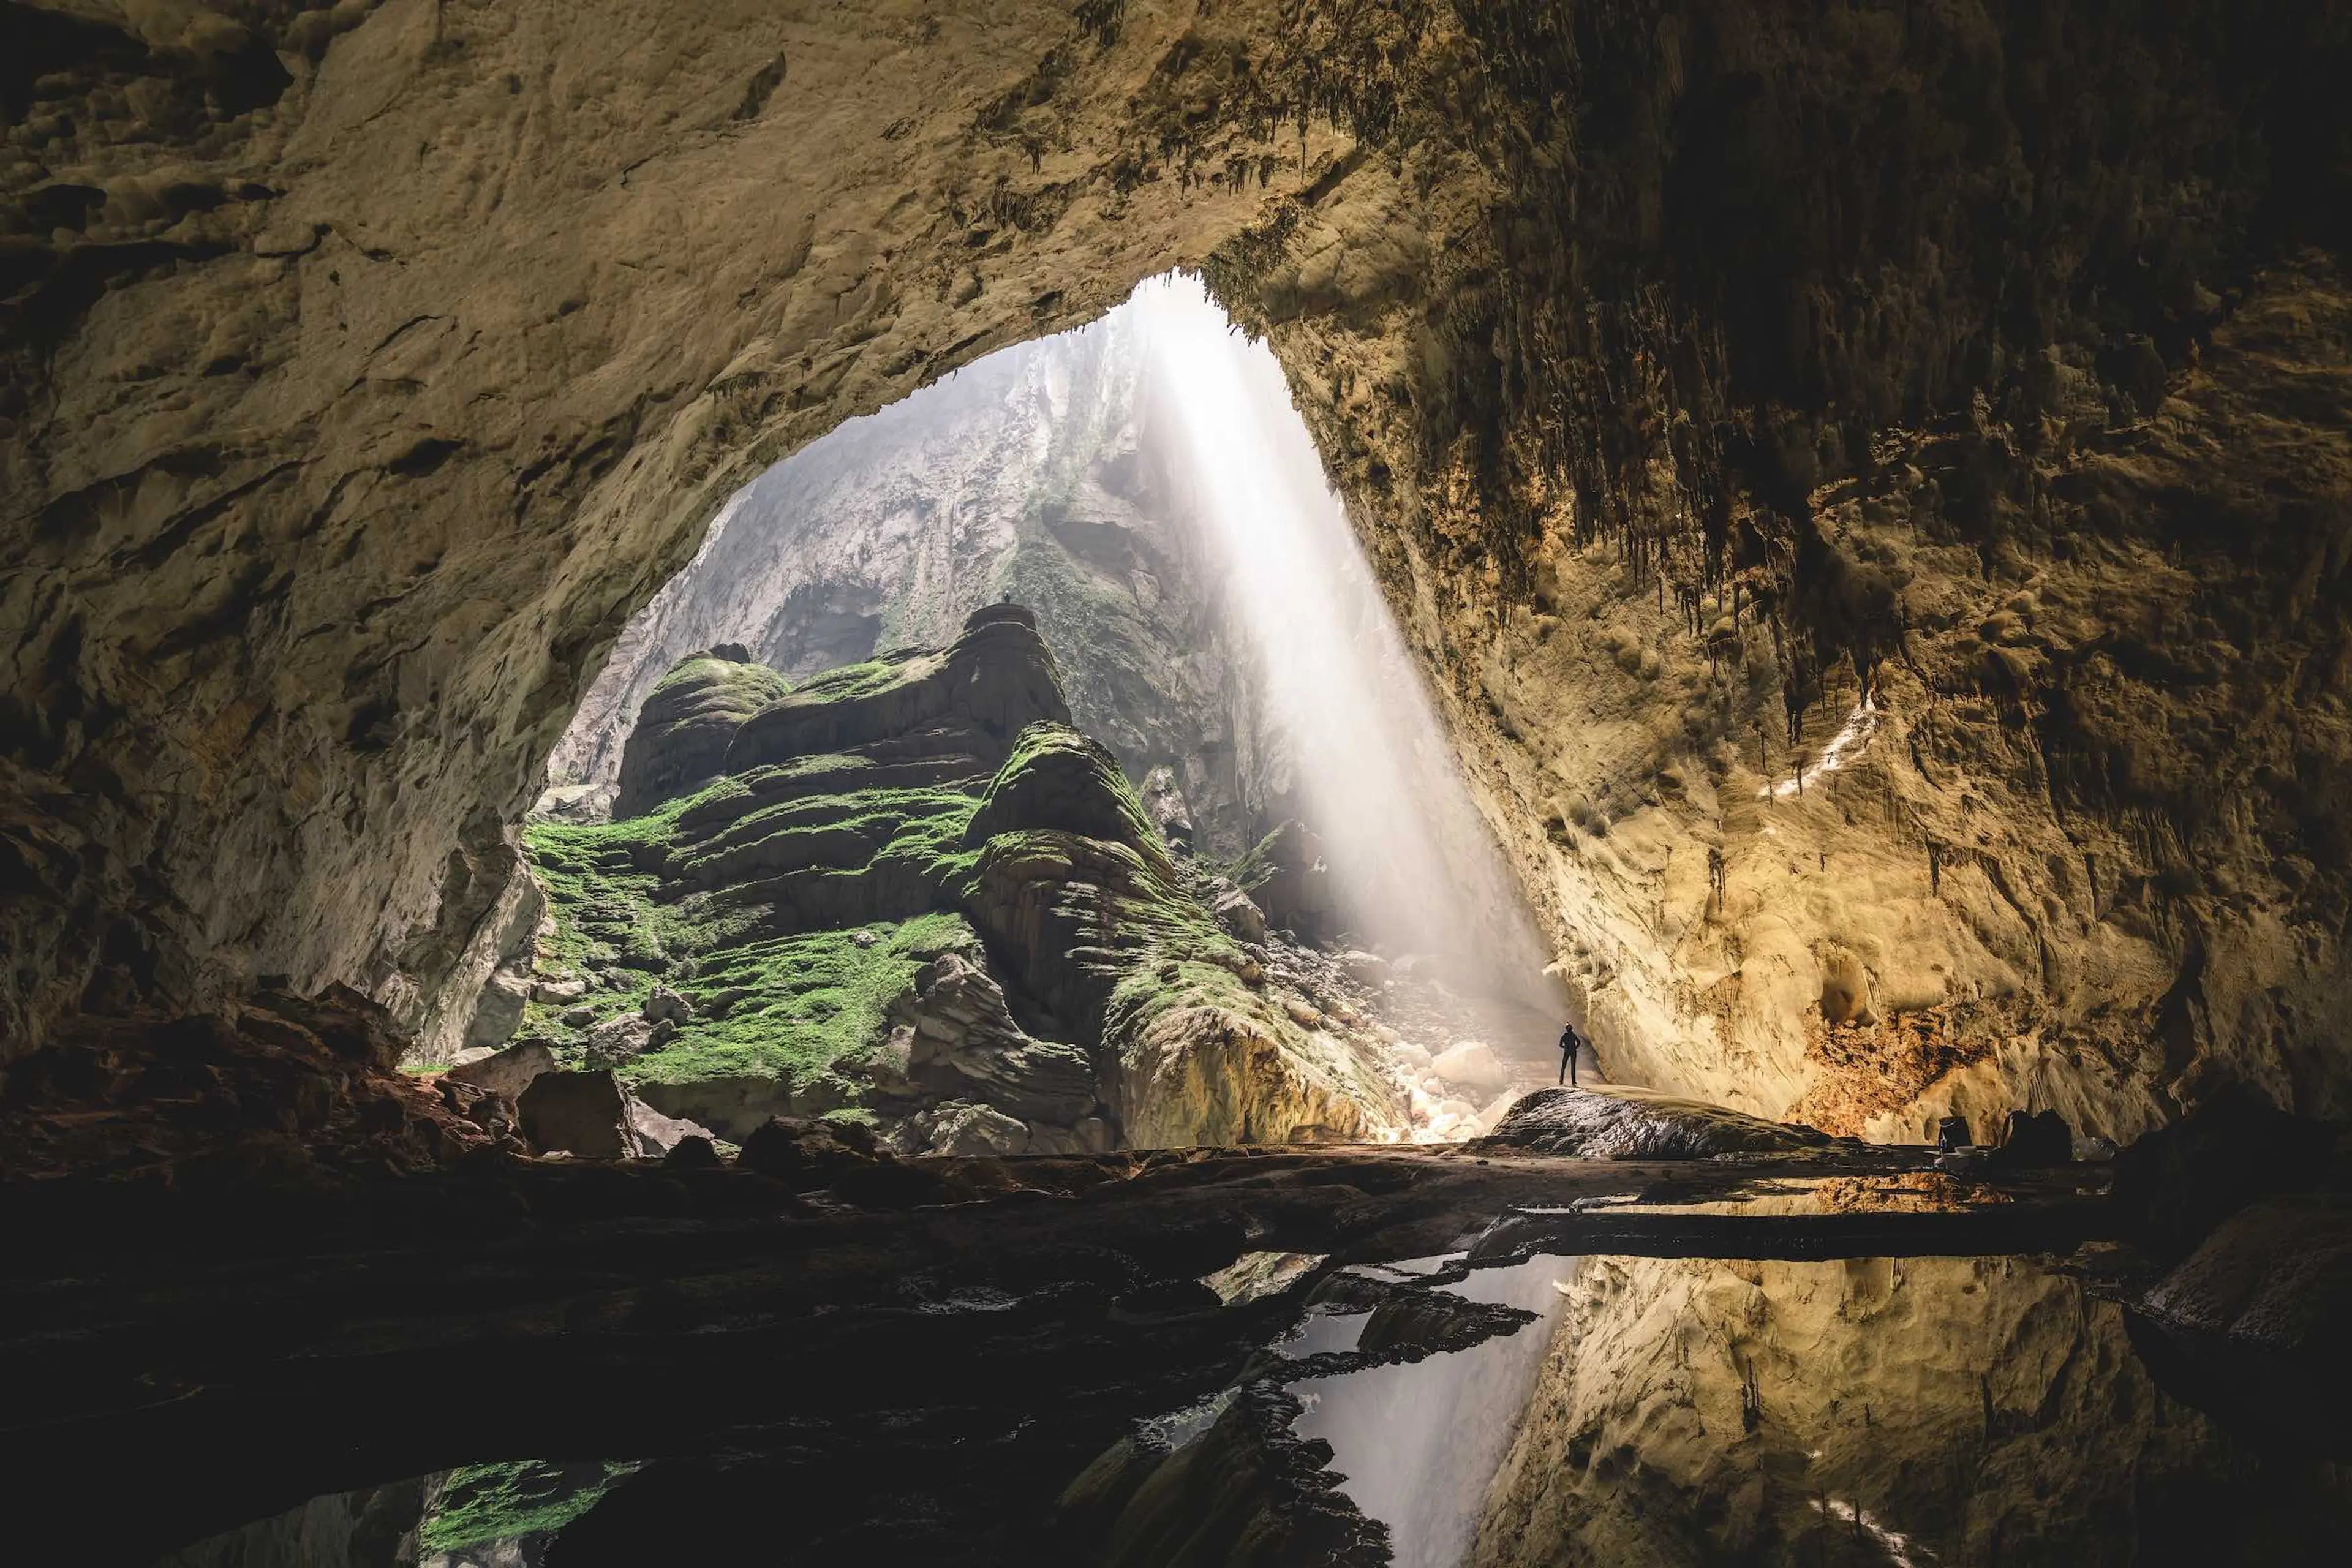 Son Doong Cave was declared by National Geographic TV as the largest natural cave in the world. If these caves were connected, the volume of Hang Son Doong cave in Vietnam would be increased by 1.6 million cubic metres.